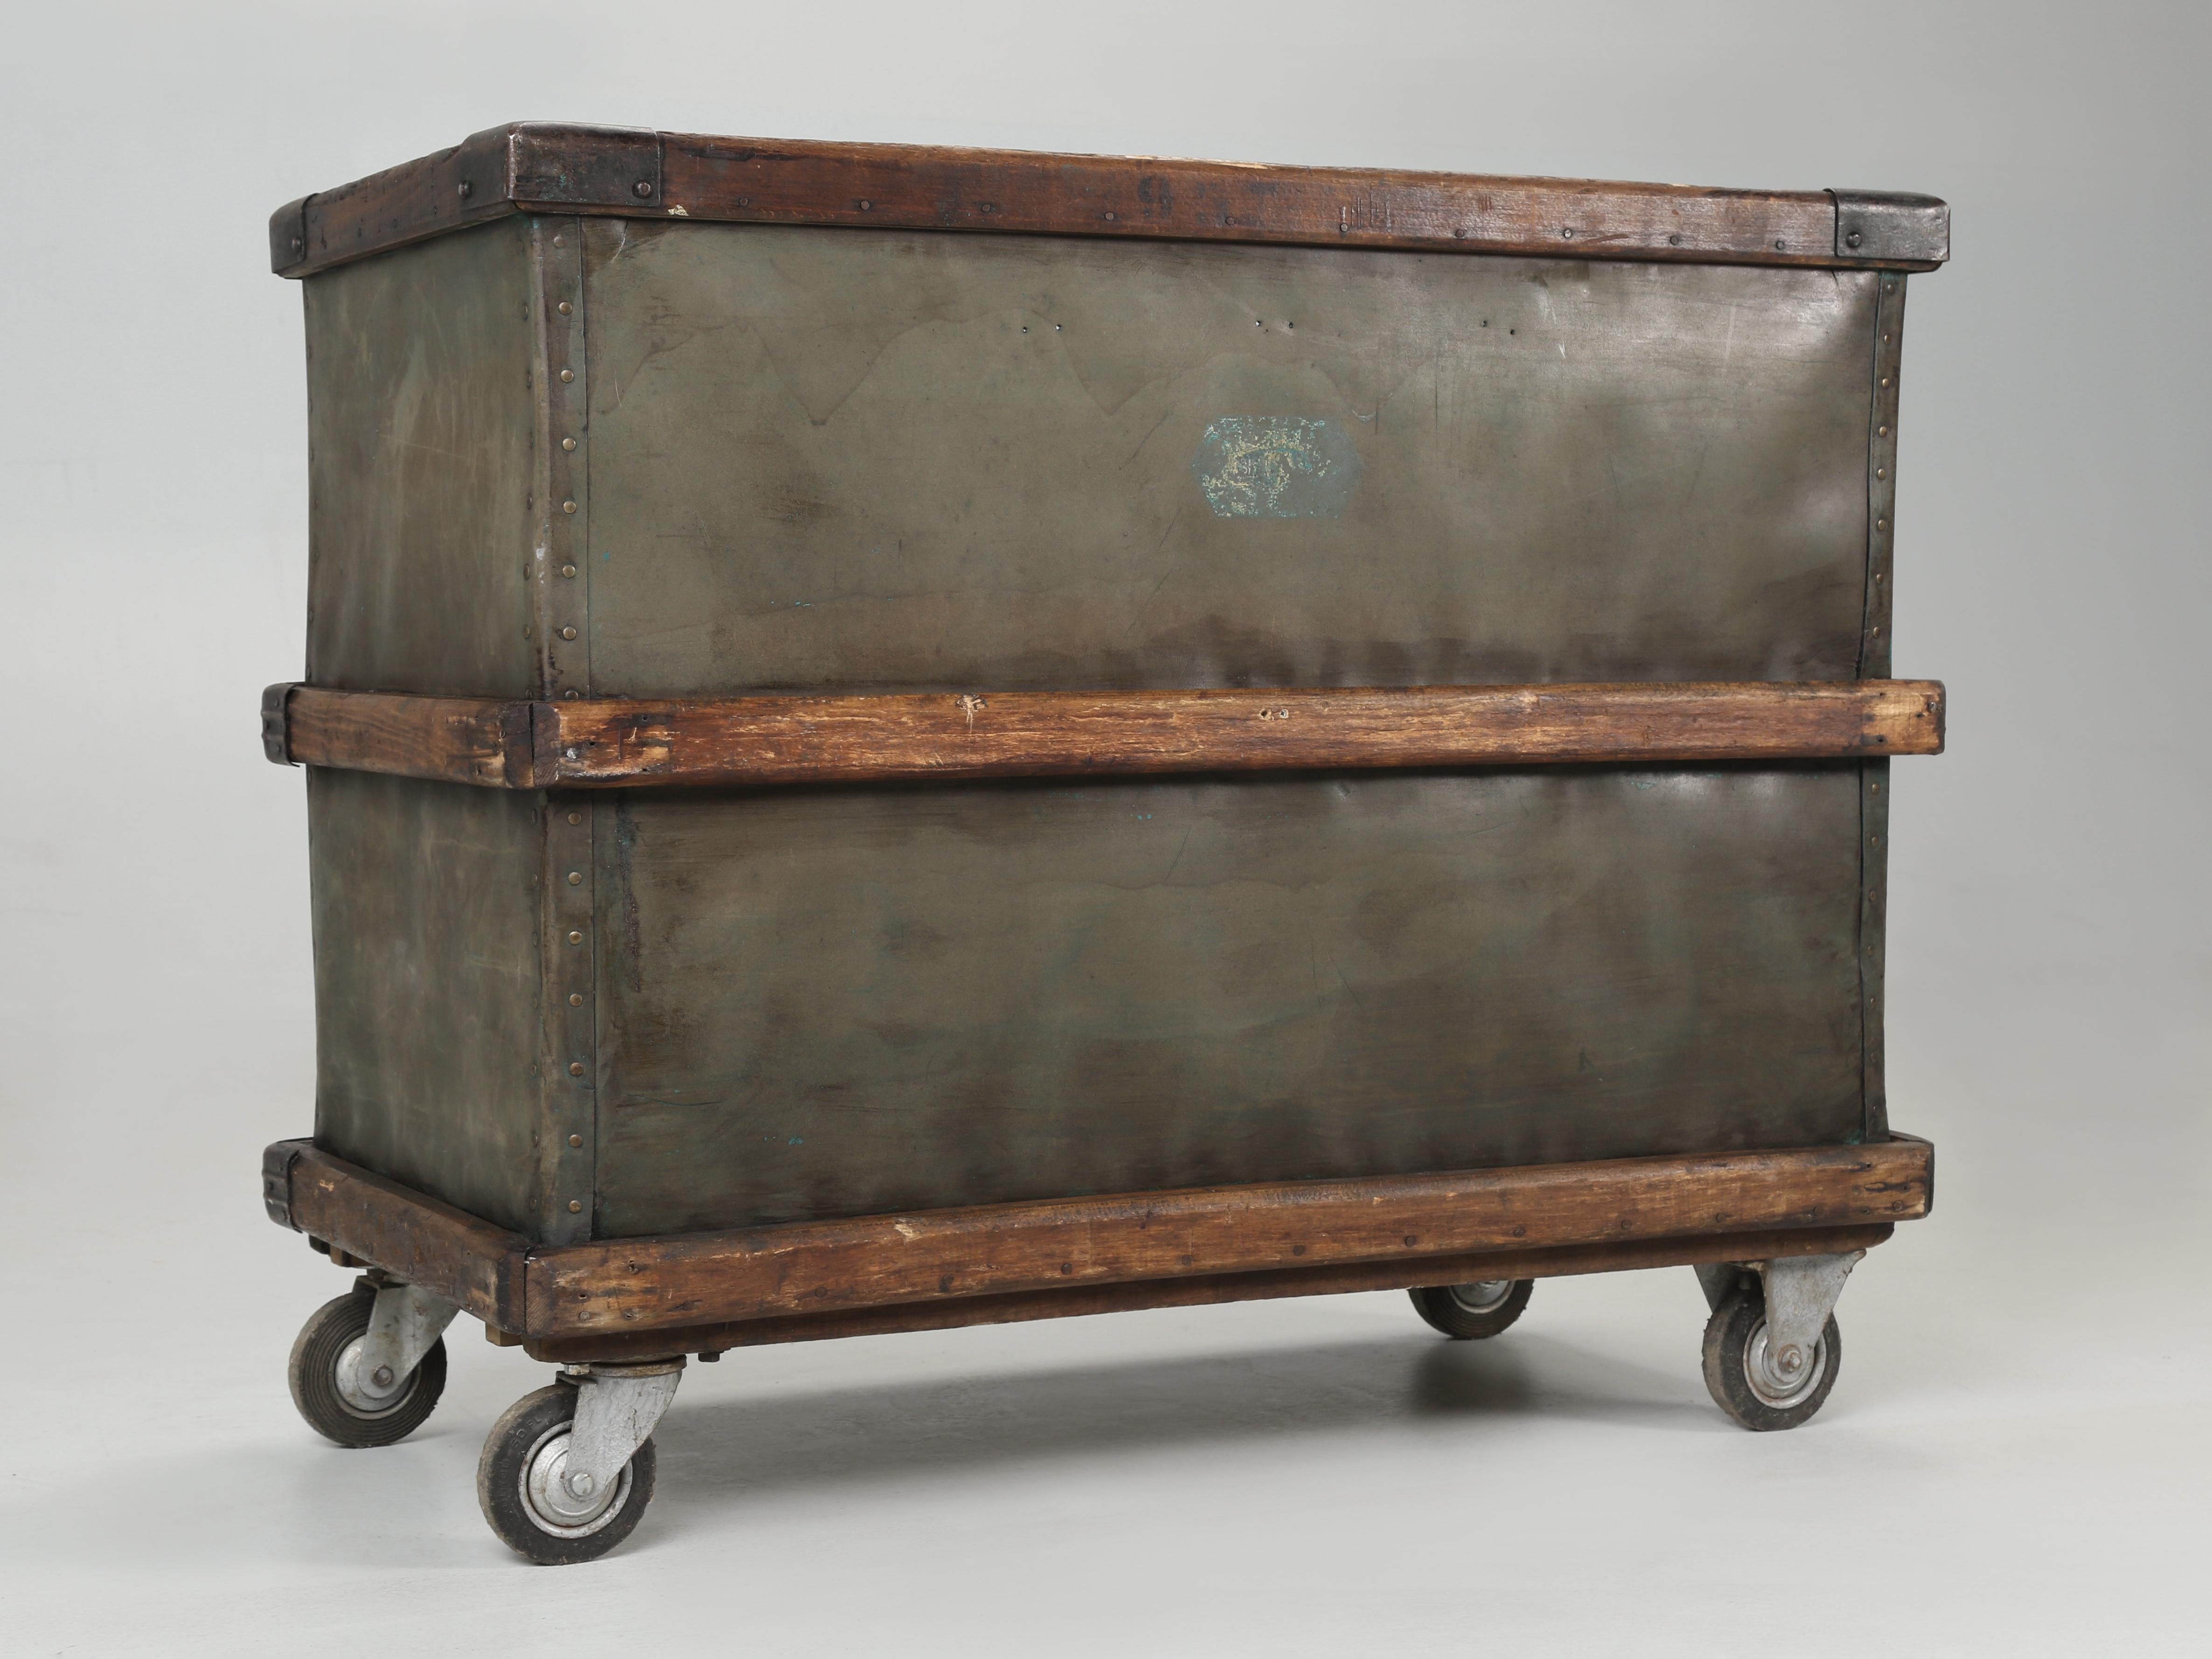 French Repurposed Mobile Suroy Storage Container into a Bar Cart or Office Cart 7